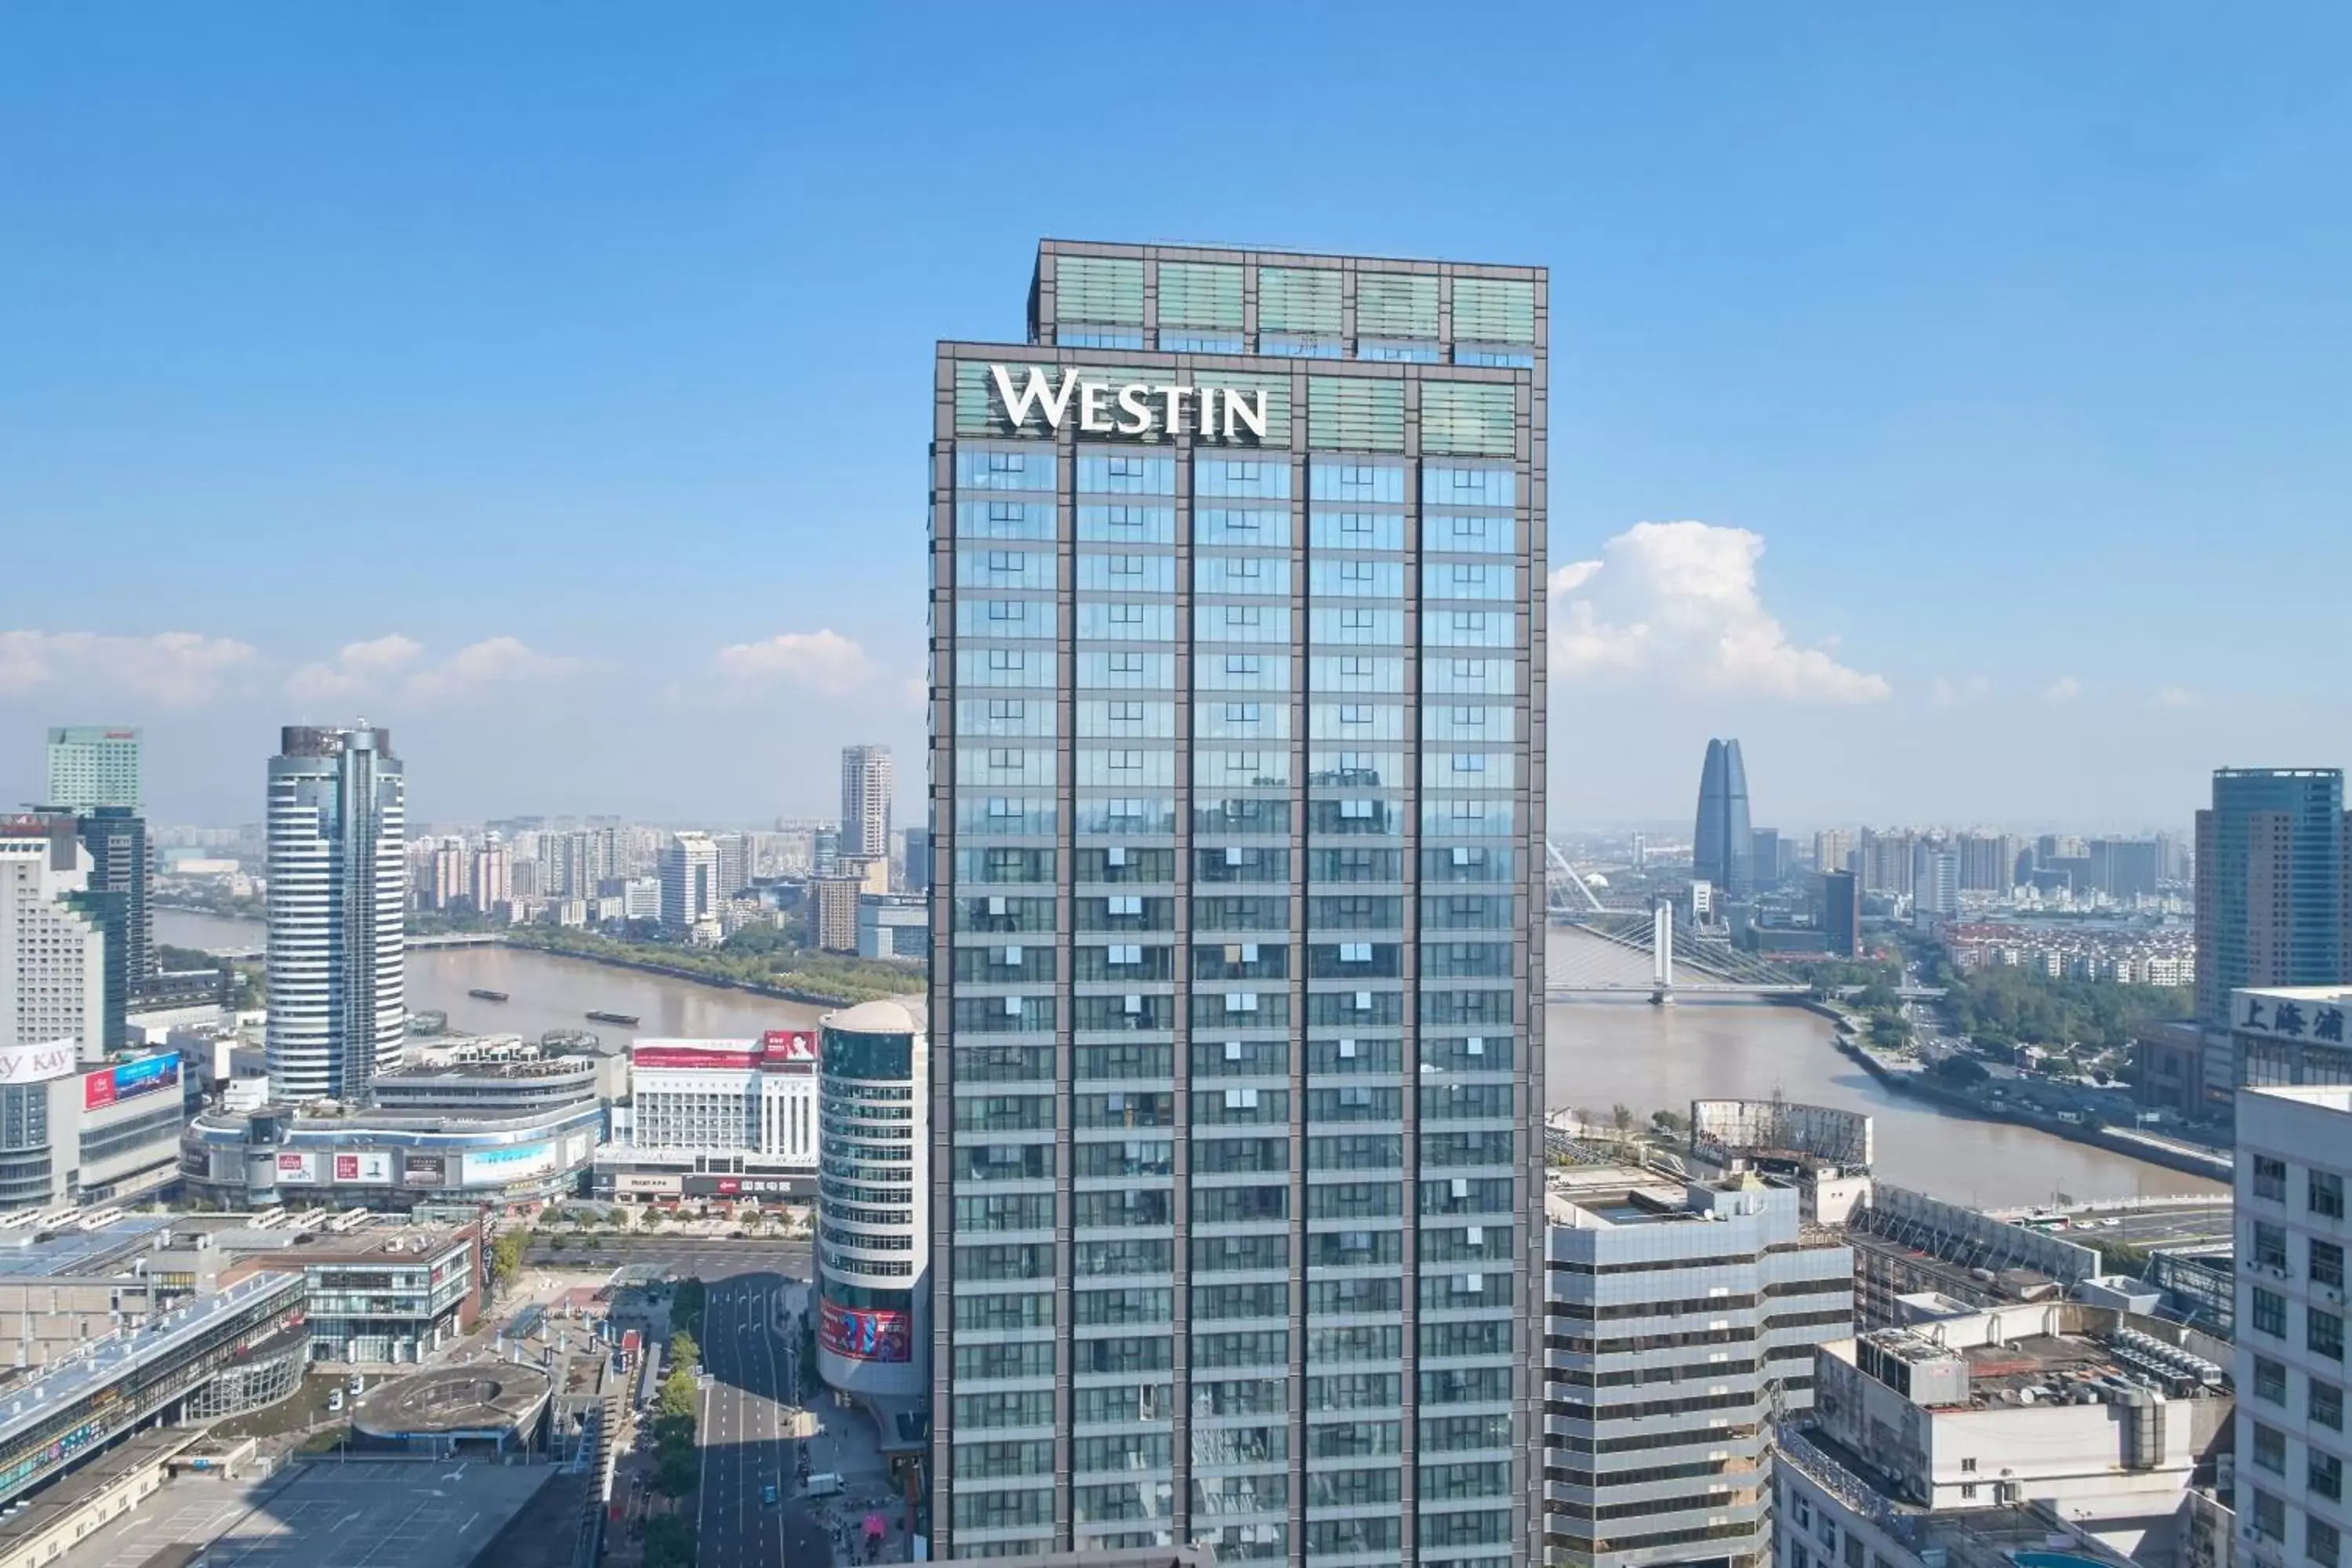 Property building in The Westin Ningbo